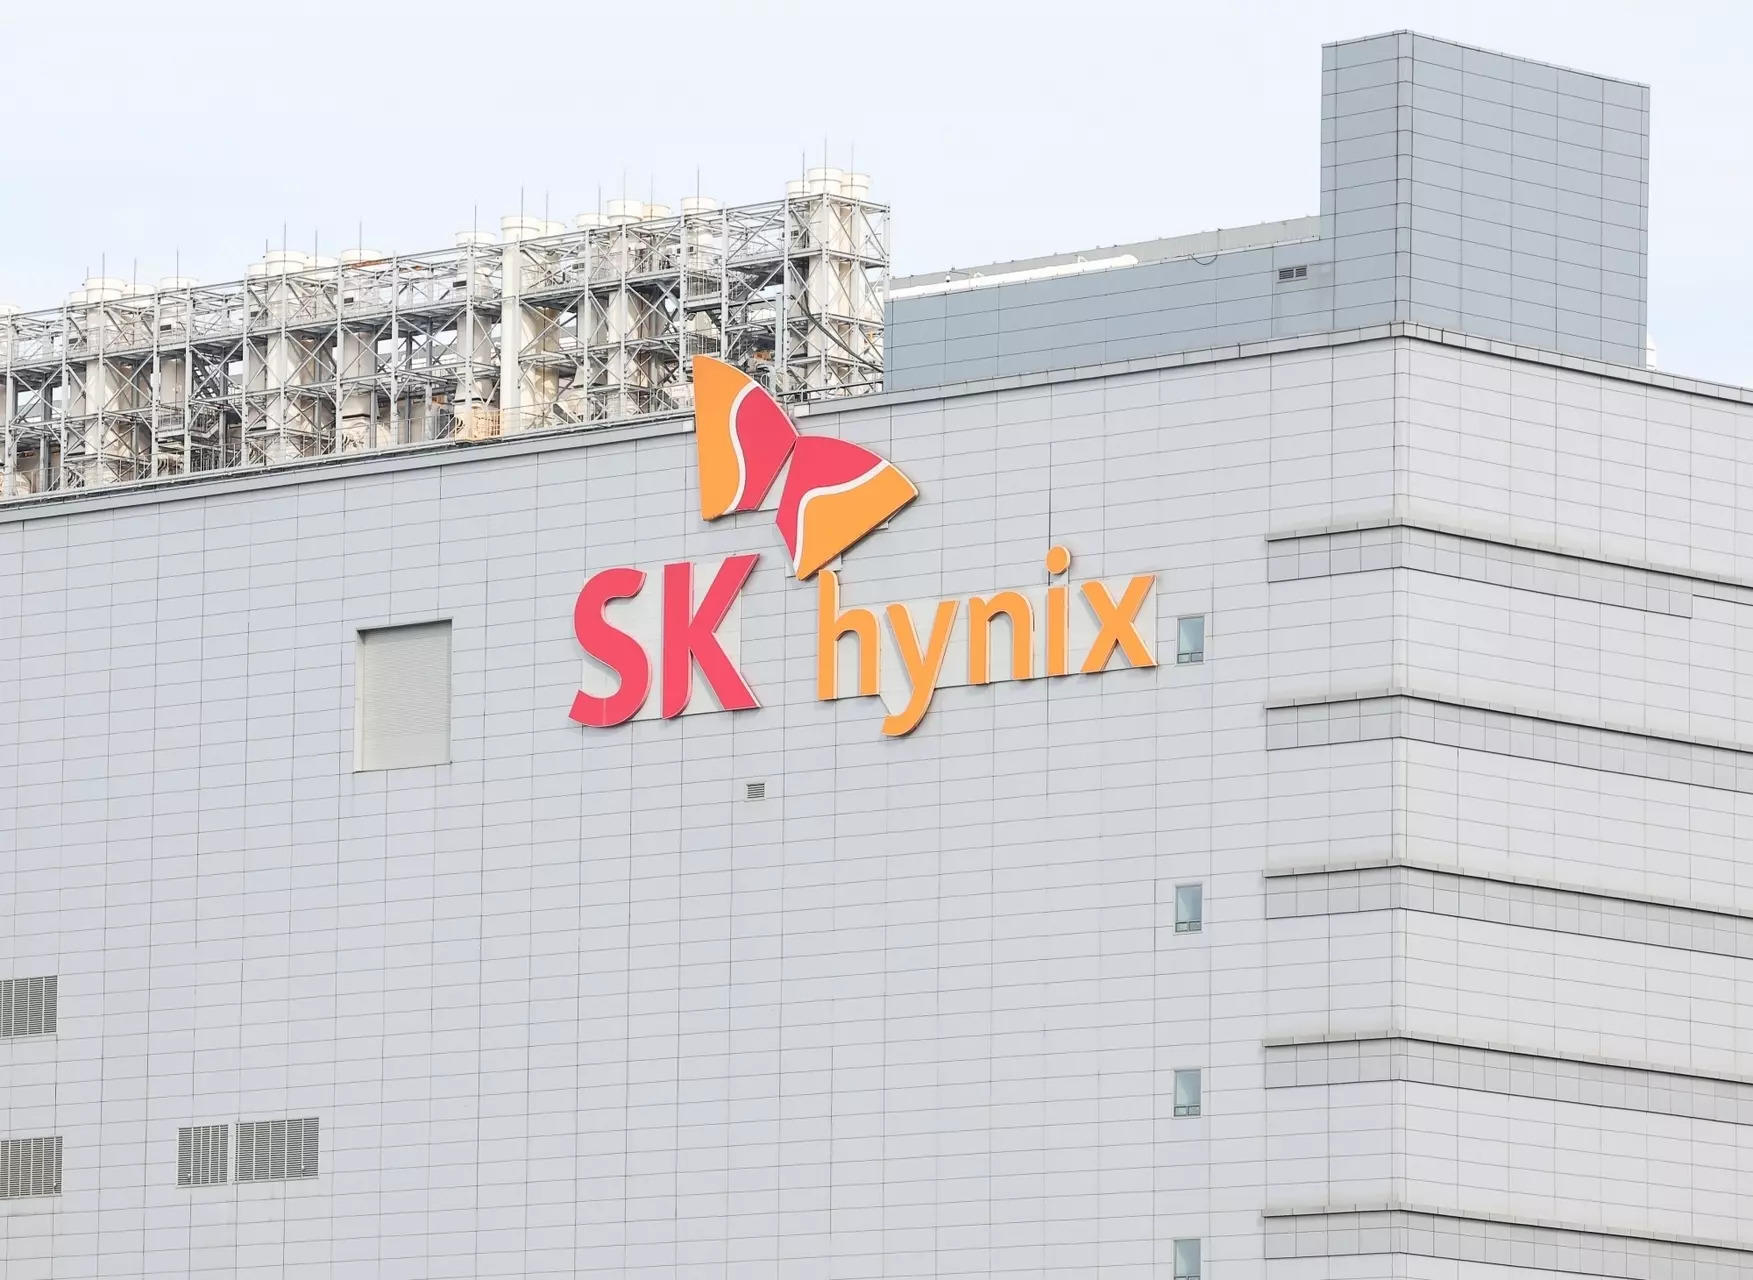 <p>SK pledged in 2022 to invest USD 15 bn in the semiconductor inc via R&D programs, materials, and the creation of an advanced packaging and testing facility in the United States.</p>